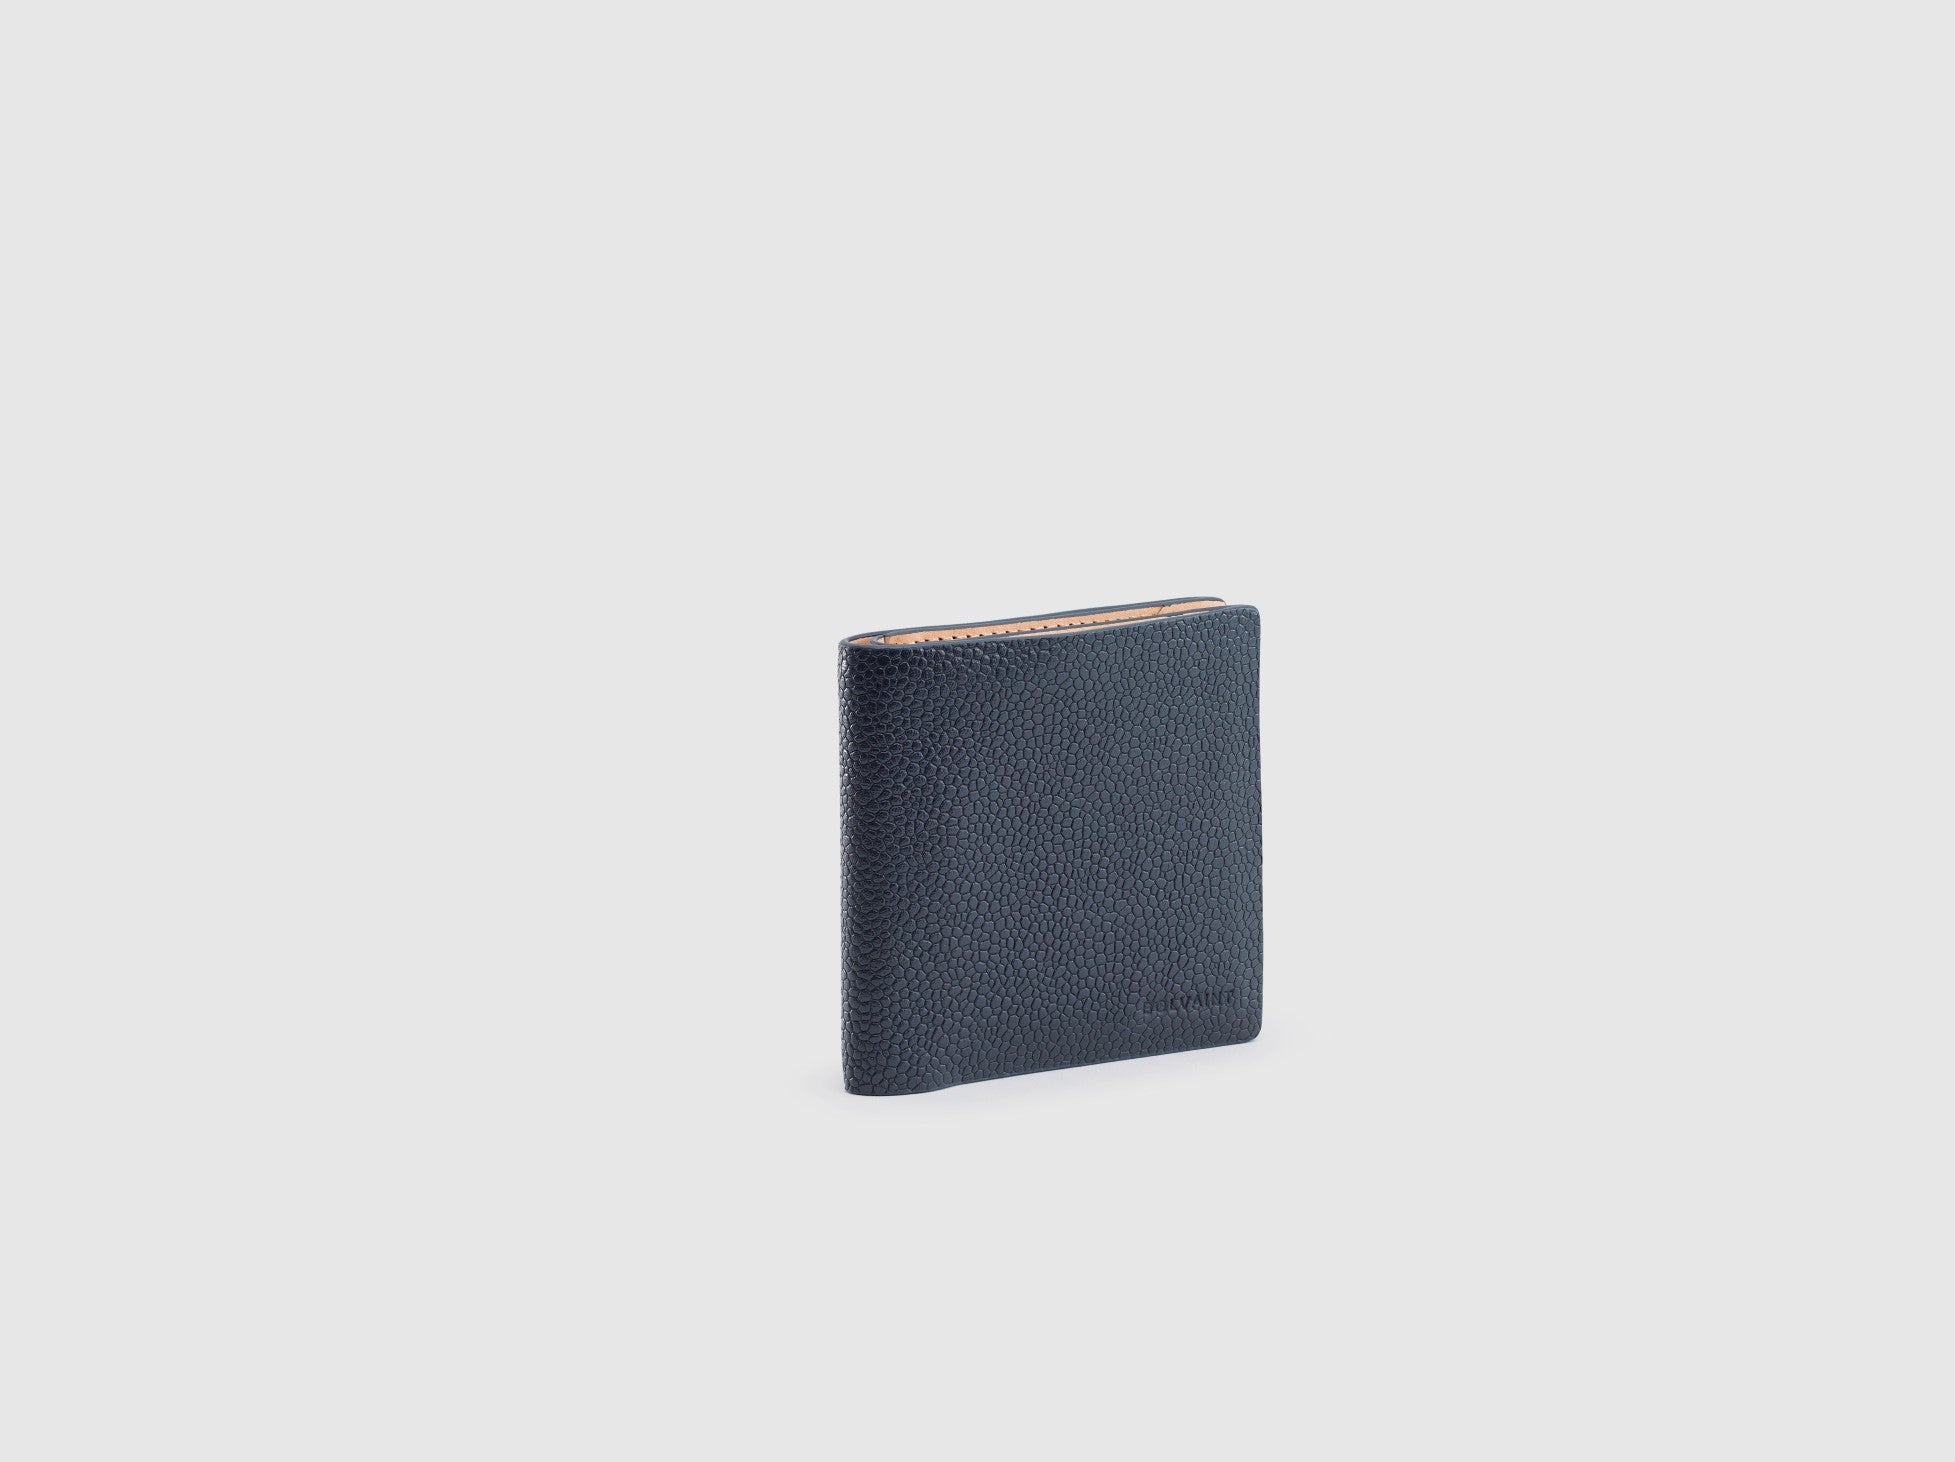 The Anders Square Wallet